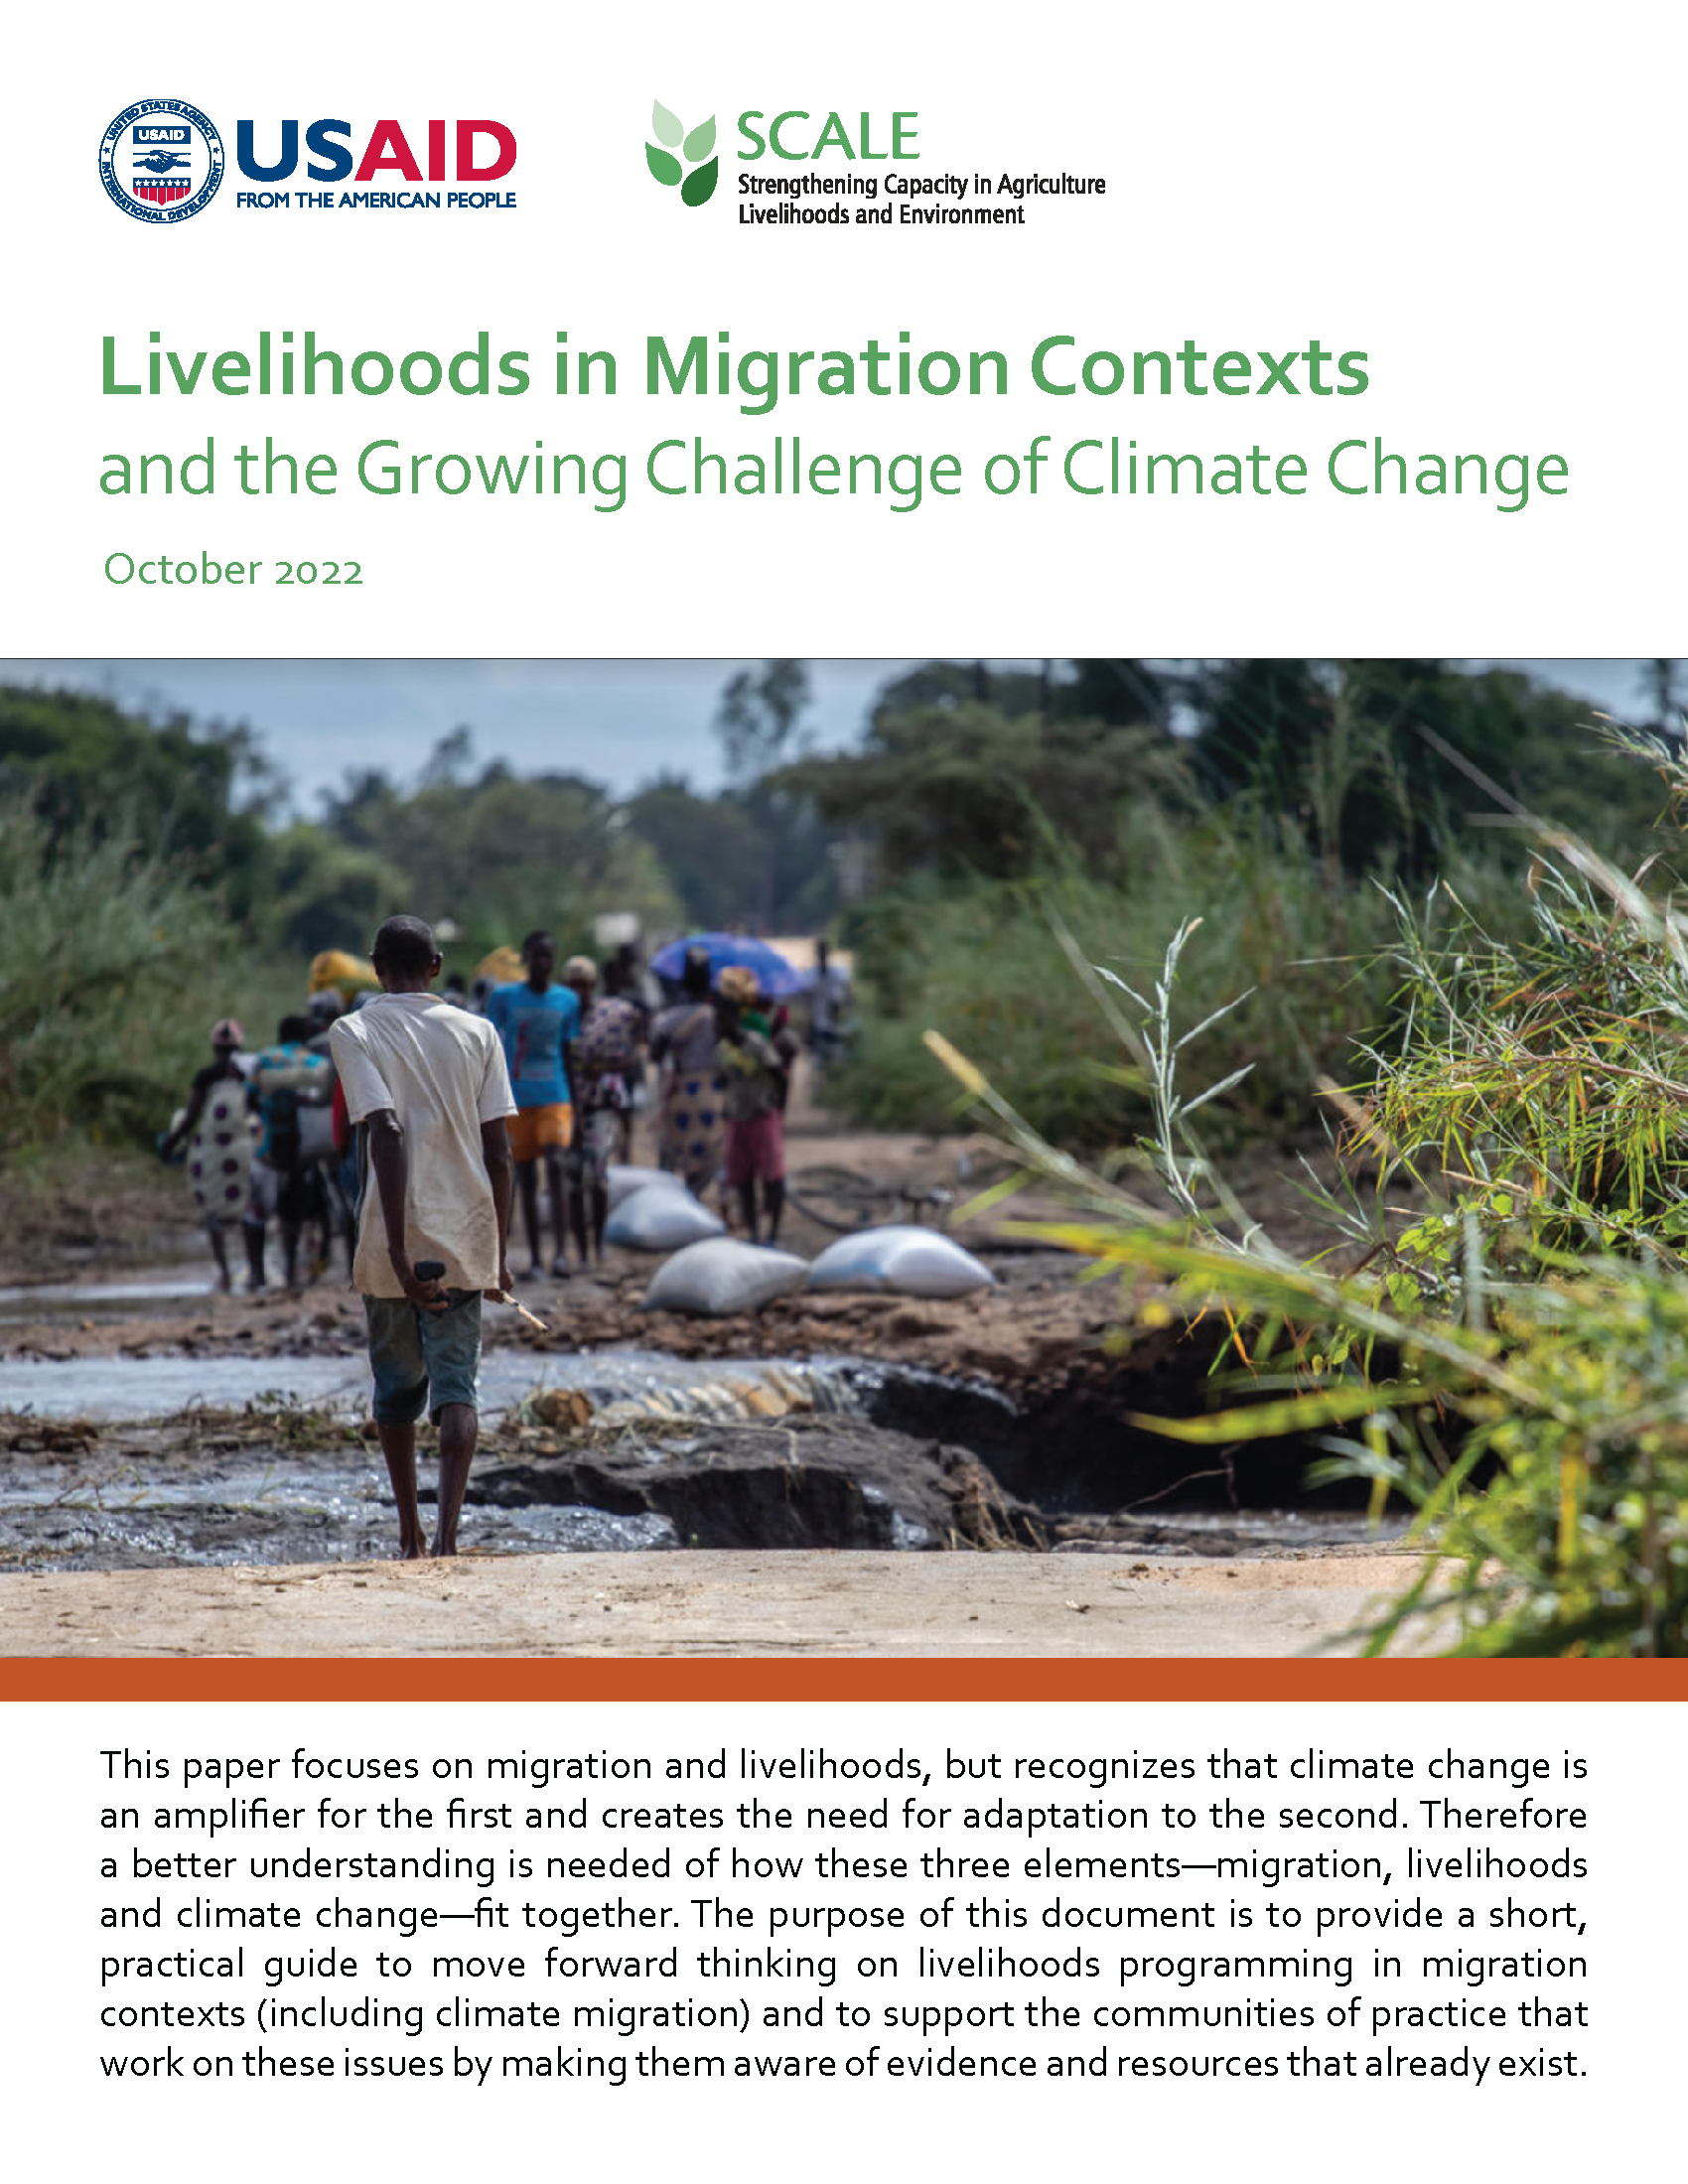 Cover page for Livelihoods in Migration Contexts